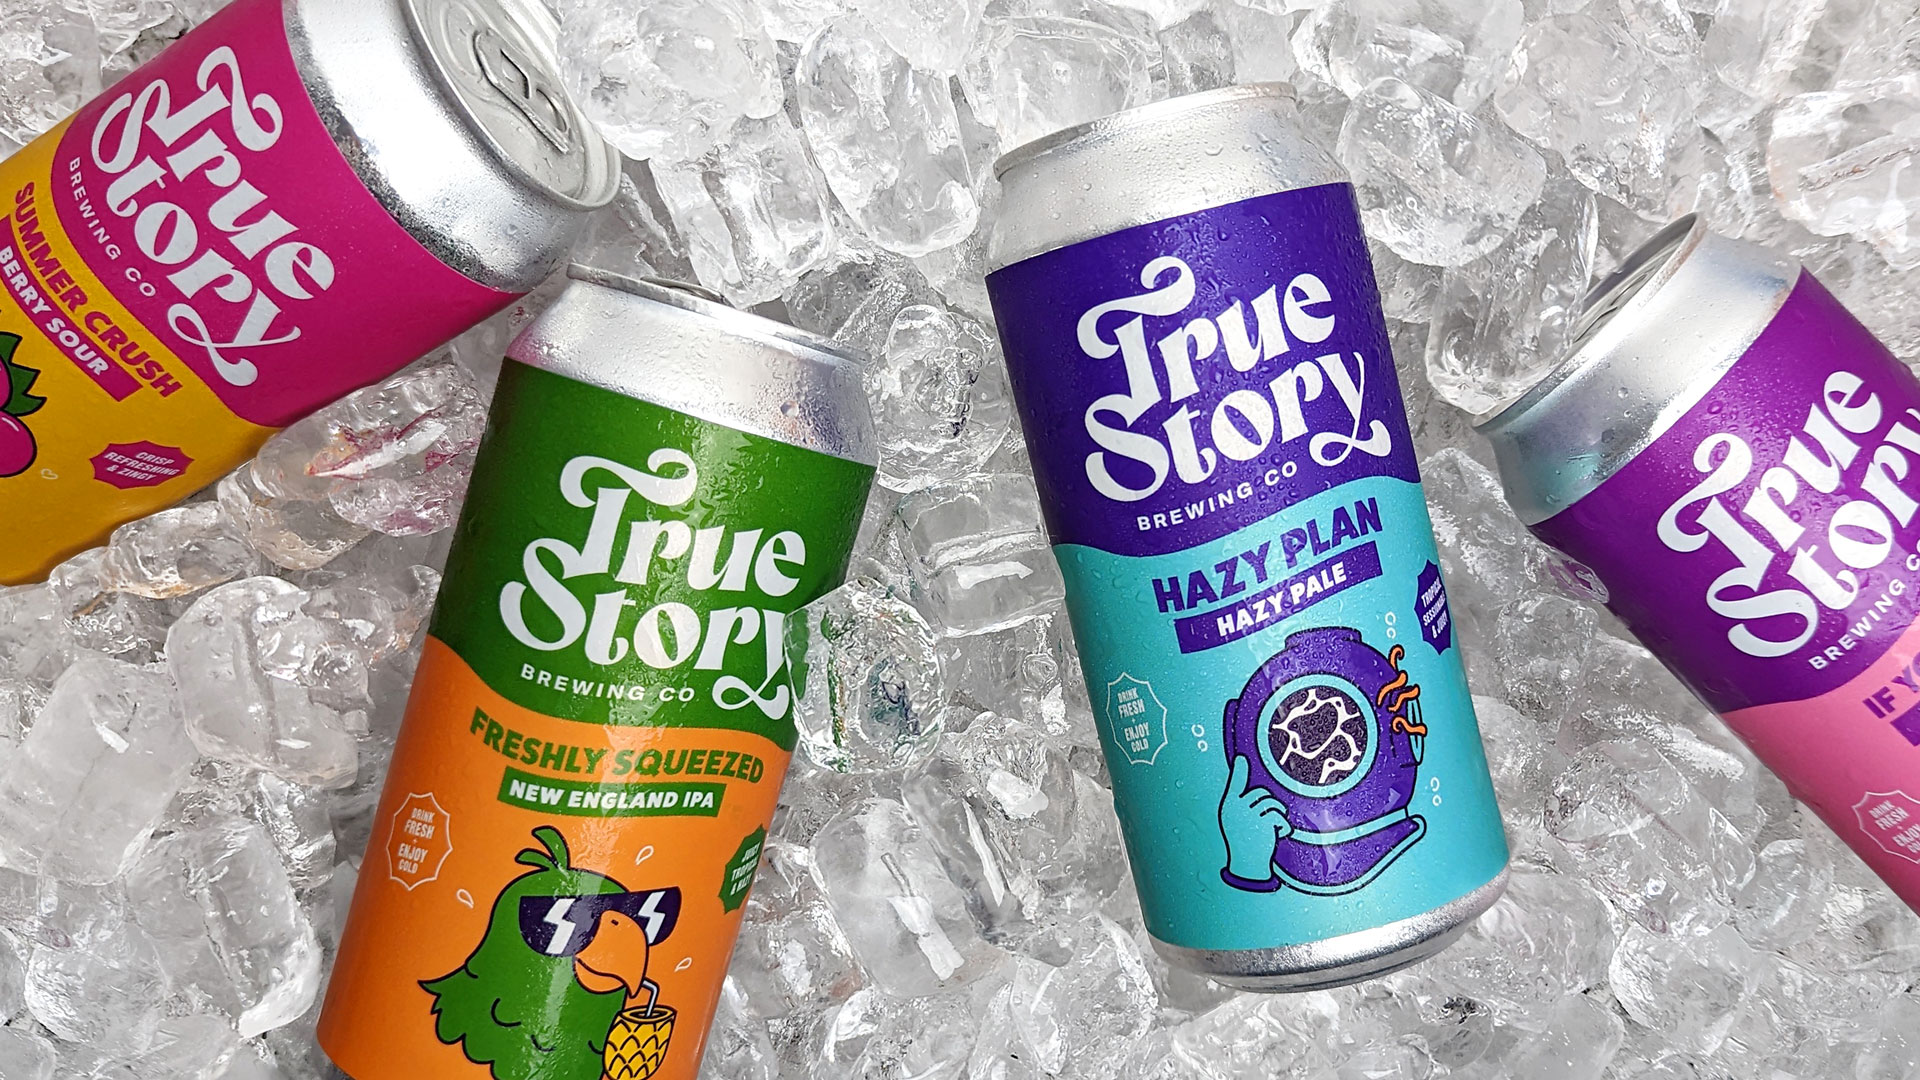 Deuce Studio Drops Refreshing New Brand And Packaging for True Story Brewing Co